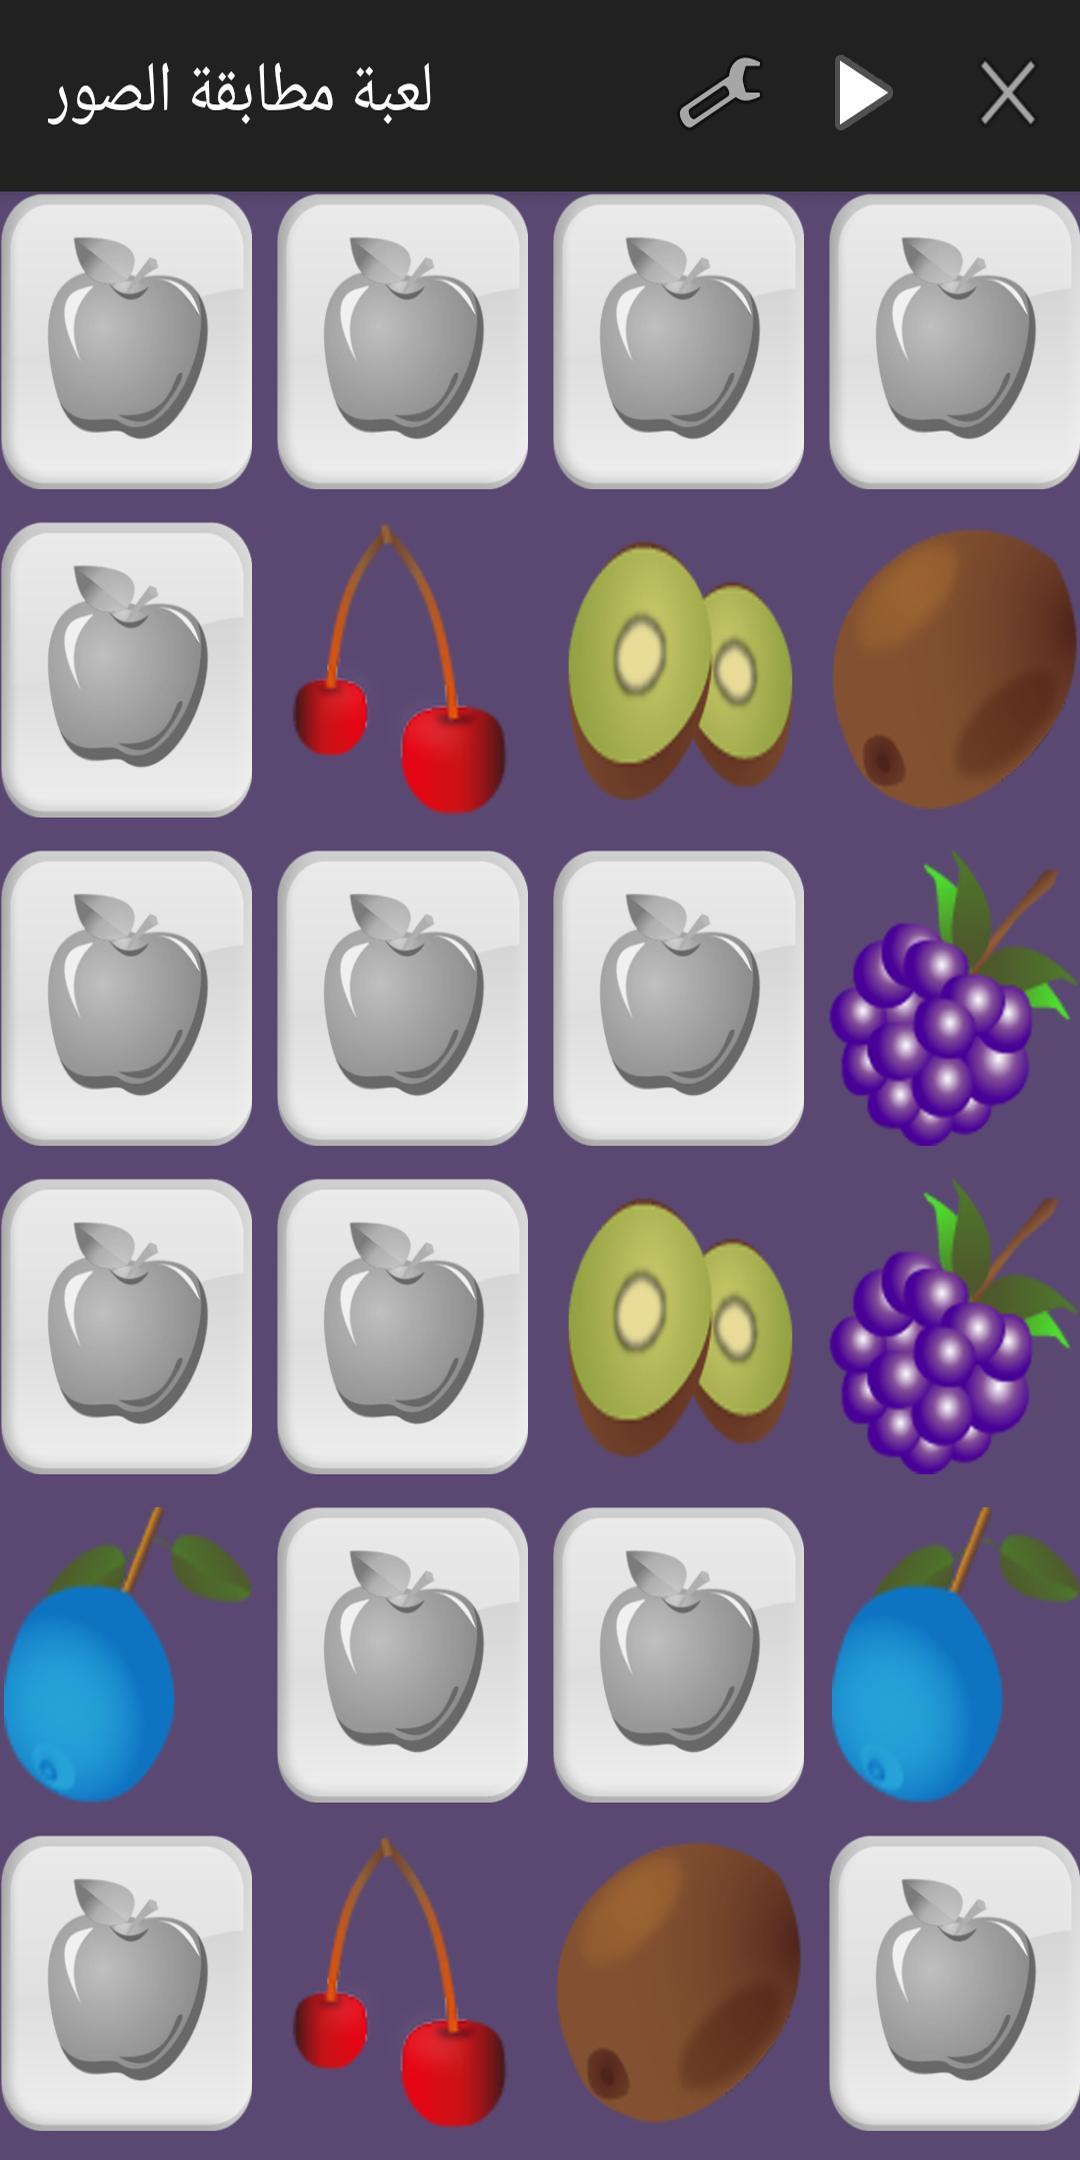 Picture Match Game for kids - Memory Brain Games 2.2.1 Screenshot 10